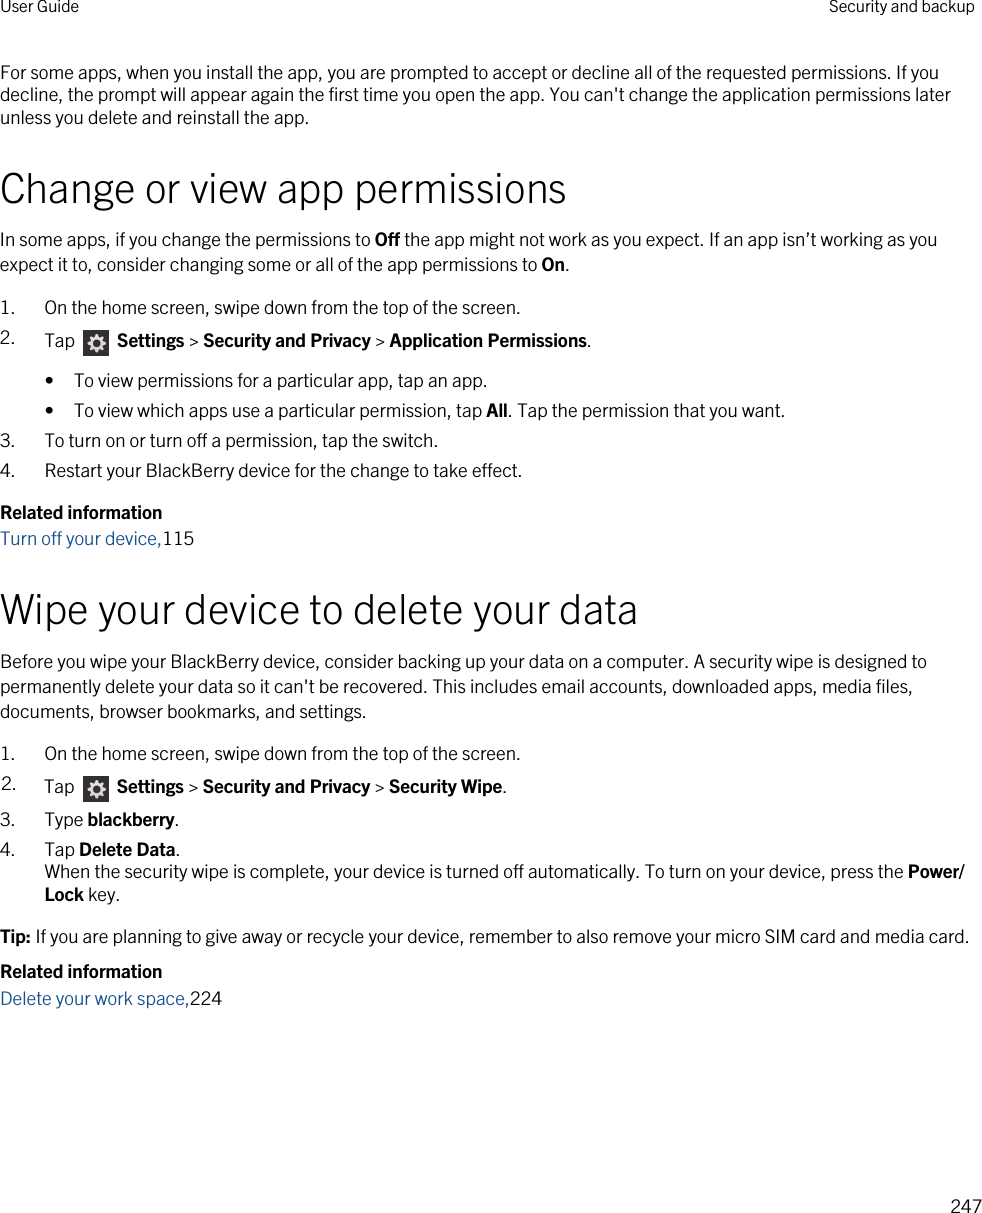 For some apps, when you install the app, you are prompted to accept or decline all of the requested permissions. If you decline, the prompt will appear again the first time you open the app. You can&apos;t change the application permissions later unless you delete and reinstall the app.Change or view app permissionsIn some apps, if you change the permissions to Off the app might not work as you expect. If an app isn’t working as you expect it to, consider changing some or all of the app permissions to On.1. On the home screen, swipe down from the top of the screen.2. Tap   Settings &gt; Security and Privacy &gt; Application Permissions. • To view permissions for a particular app, tap an app.• To view which apps use a particular permission, tap All. Tap the permission that you want.3. To turn on or turn off a permission, tap the switch.4. Restart your BlackBerry device for the change to take effect.Related informationTurn off your device,115Wipe your device to delete your dataBefore you wipe your BlackBerry device, consider backing up your data on a computer. A security wipe is designed to permanently delete your data so it can&apos;t be recovered. This includes email accounts, downloaded apps, media files, documents, browser bookmarks, and settings.1. On the home screen, swipe down from the top of the screen.2. Tap   Settings &gt; Security and Privacy &gt; Security Wipe.3. Type blackberry.4. Tap Delete Data.When the security wipe is complete, your device is turned off automatically. To turn on your device, press the Power/Lock key.Tip: If you are planning to give away or recycle your device, remember to also remove your micro SIM card and media card.Related informationDelete your work space,224User Guide Security and backup247